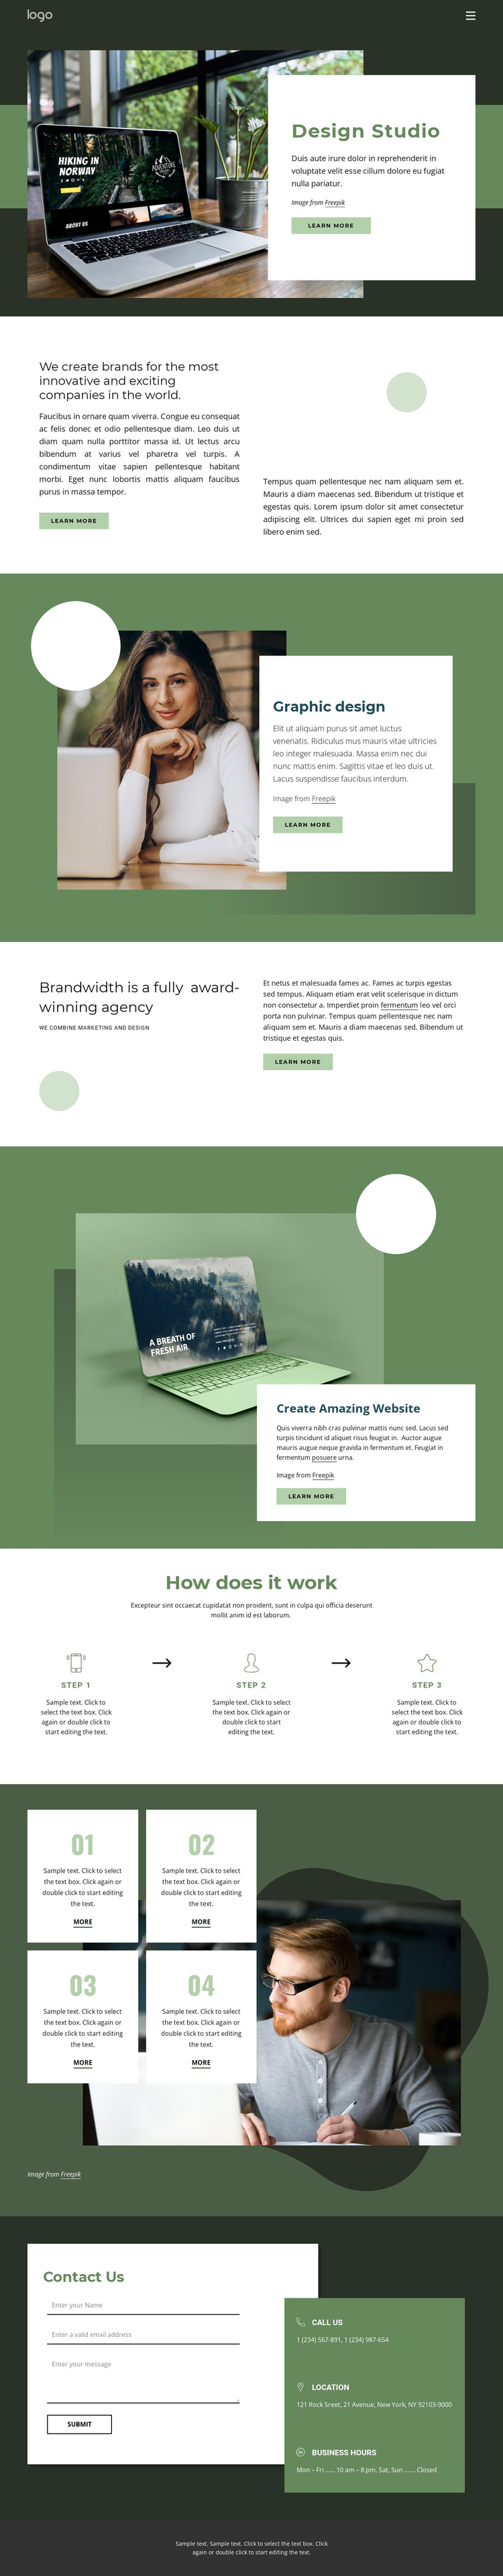 Design inspiration from nature Joomla Template